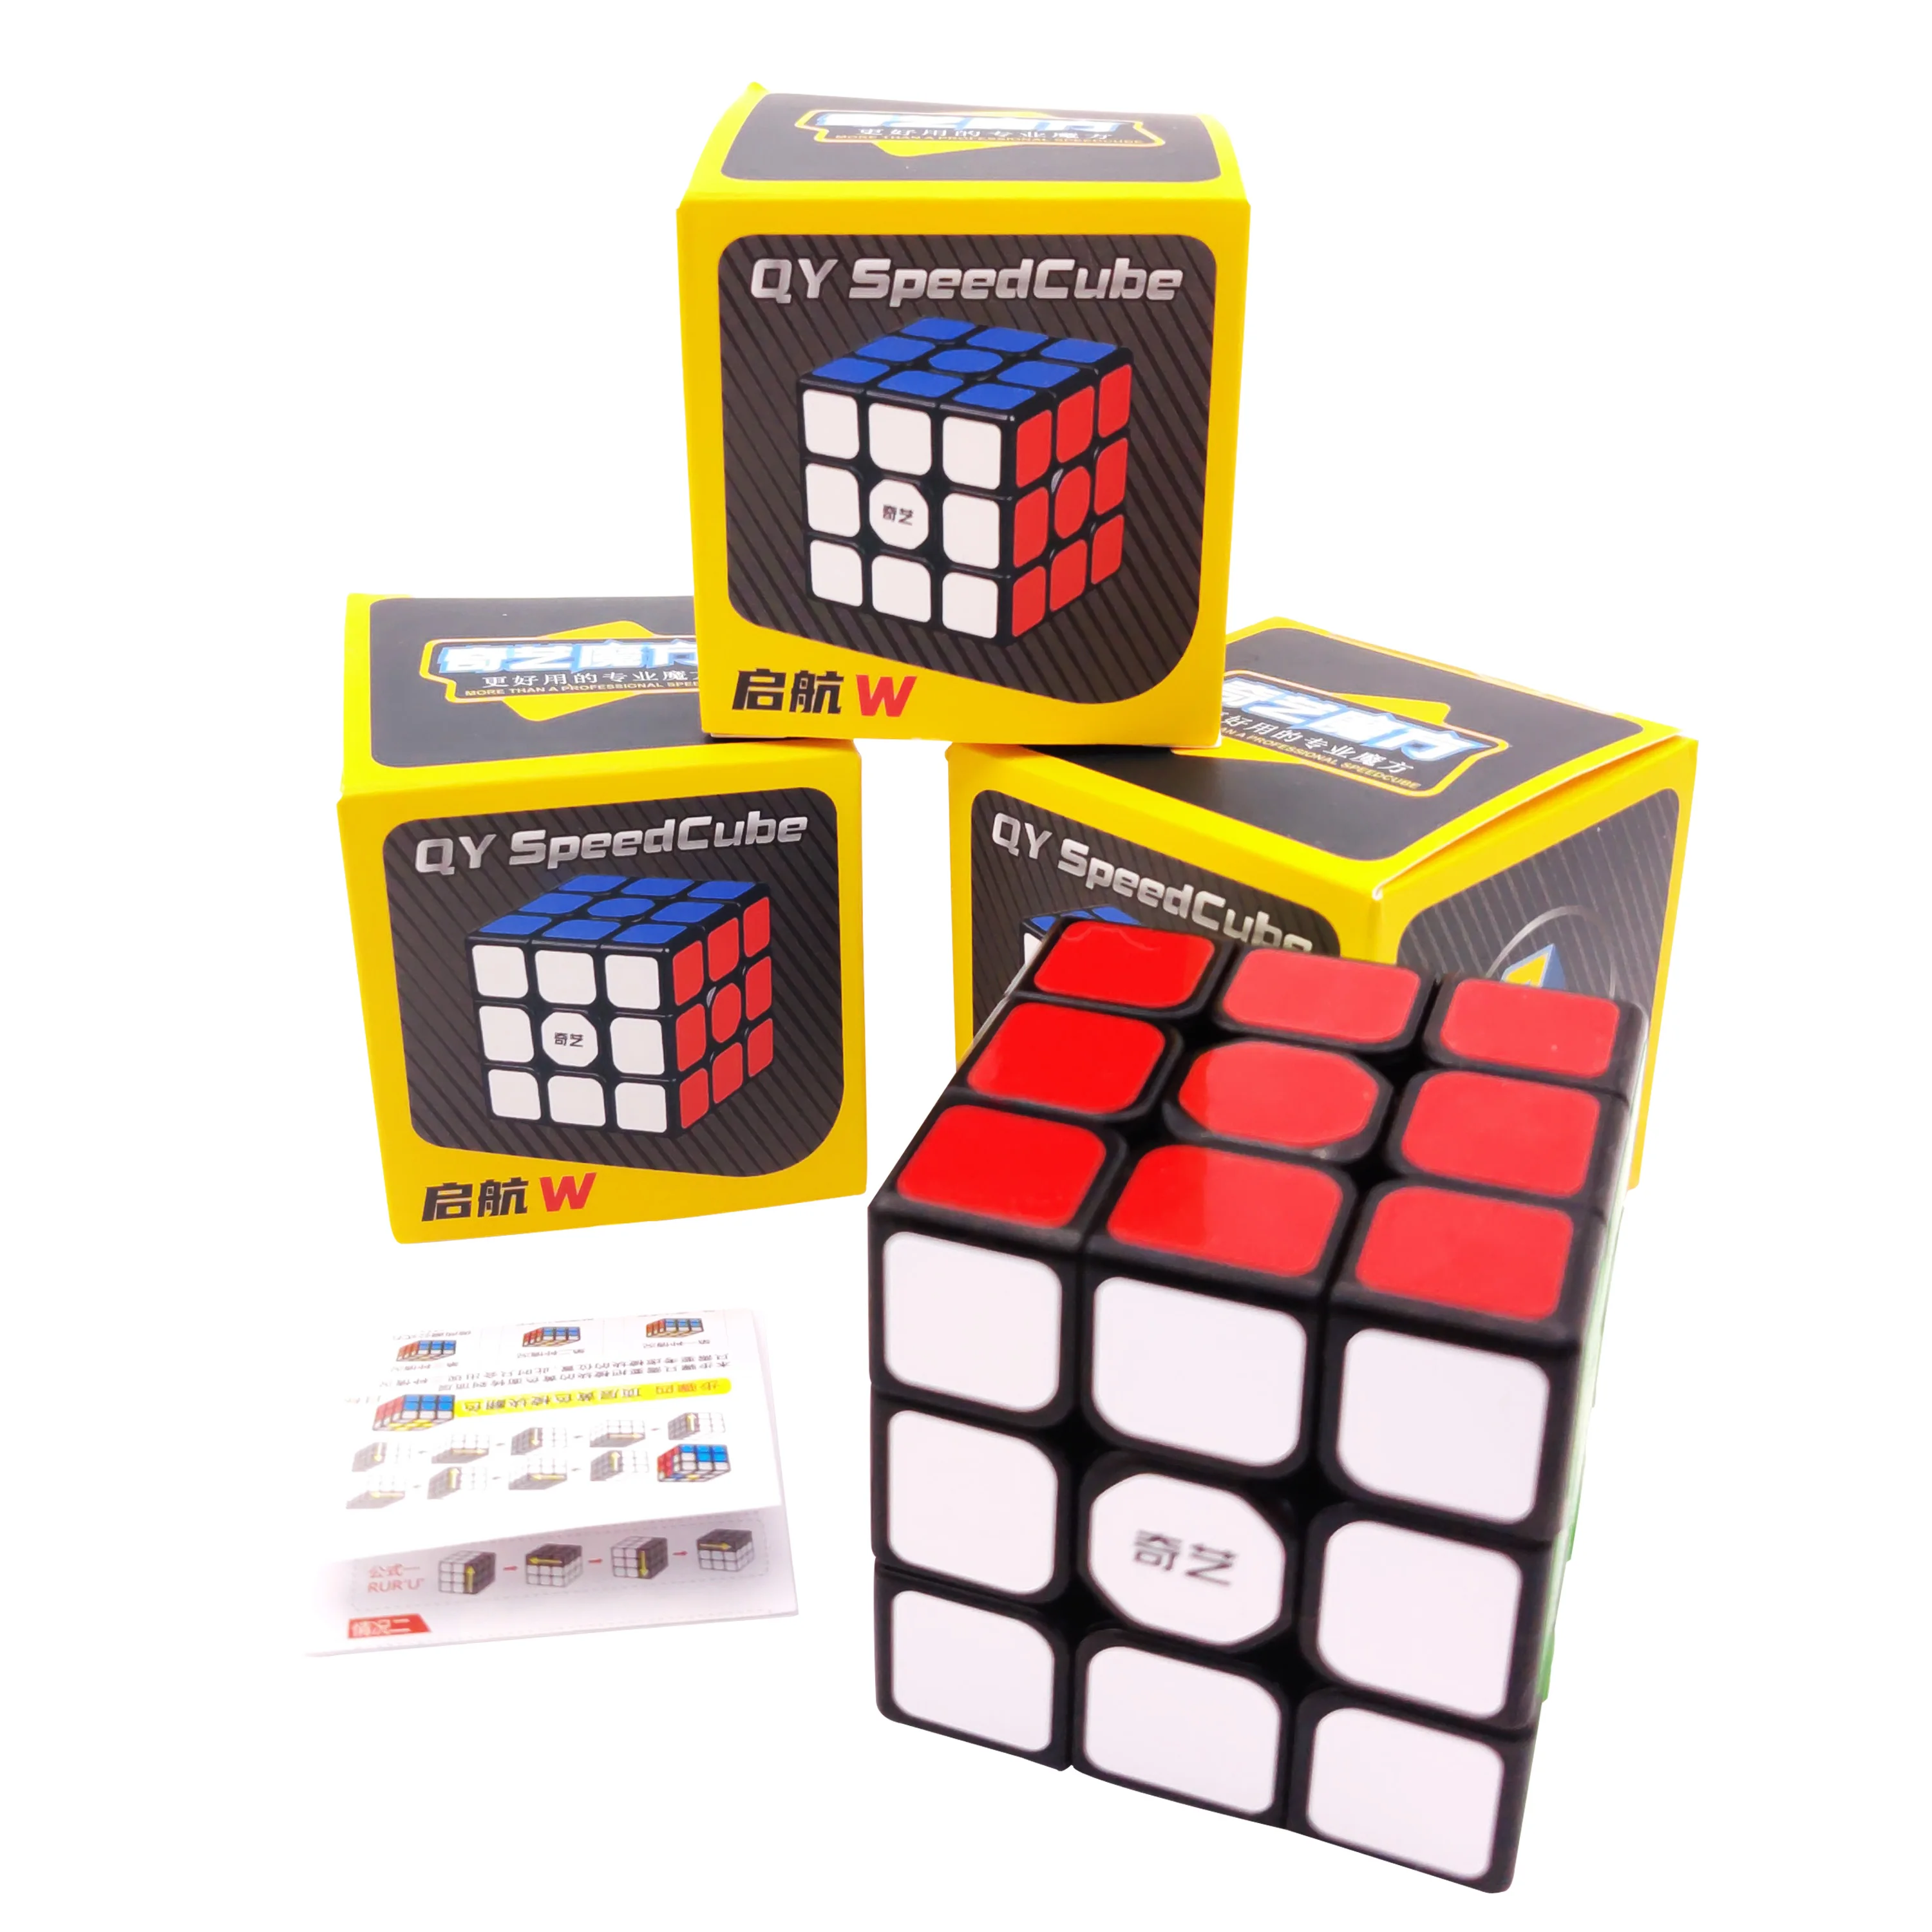 

3X3X3 Speed Cube Rubic Professional Magic Cubes Magicos Home Fidget Toys Cubo Magico Puzzles For Children Adult Rubix Cube